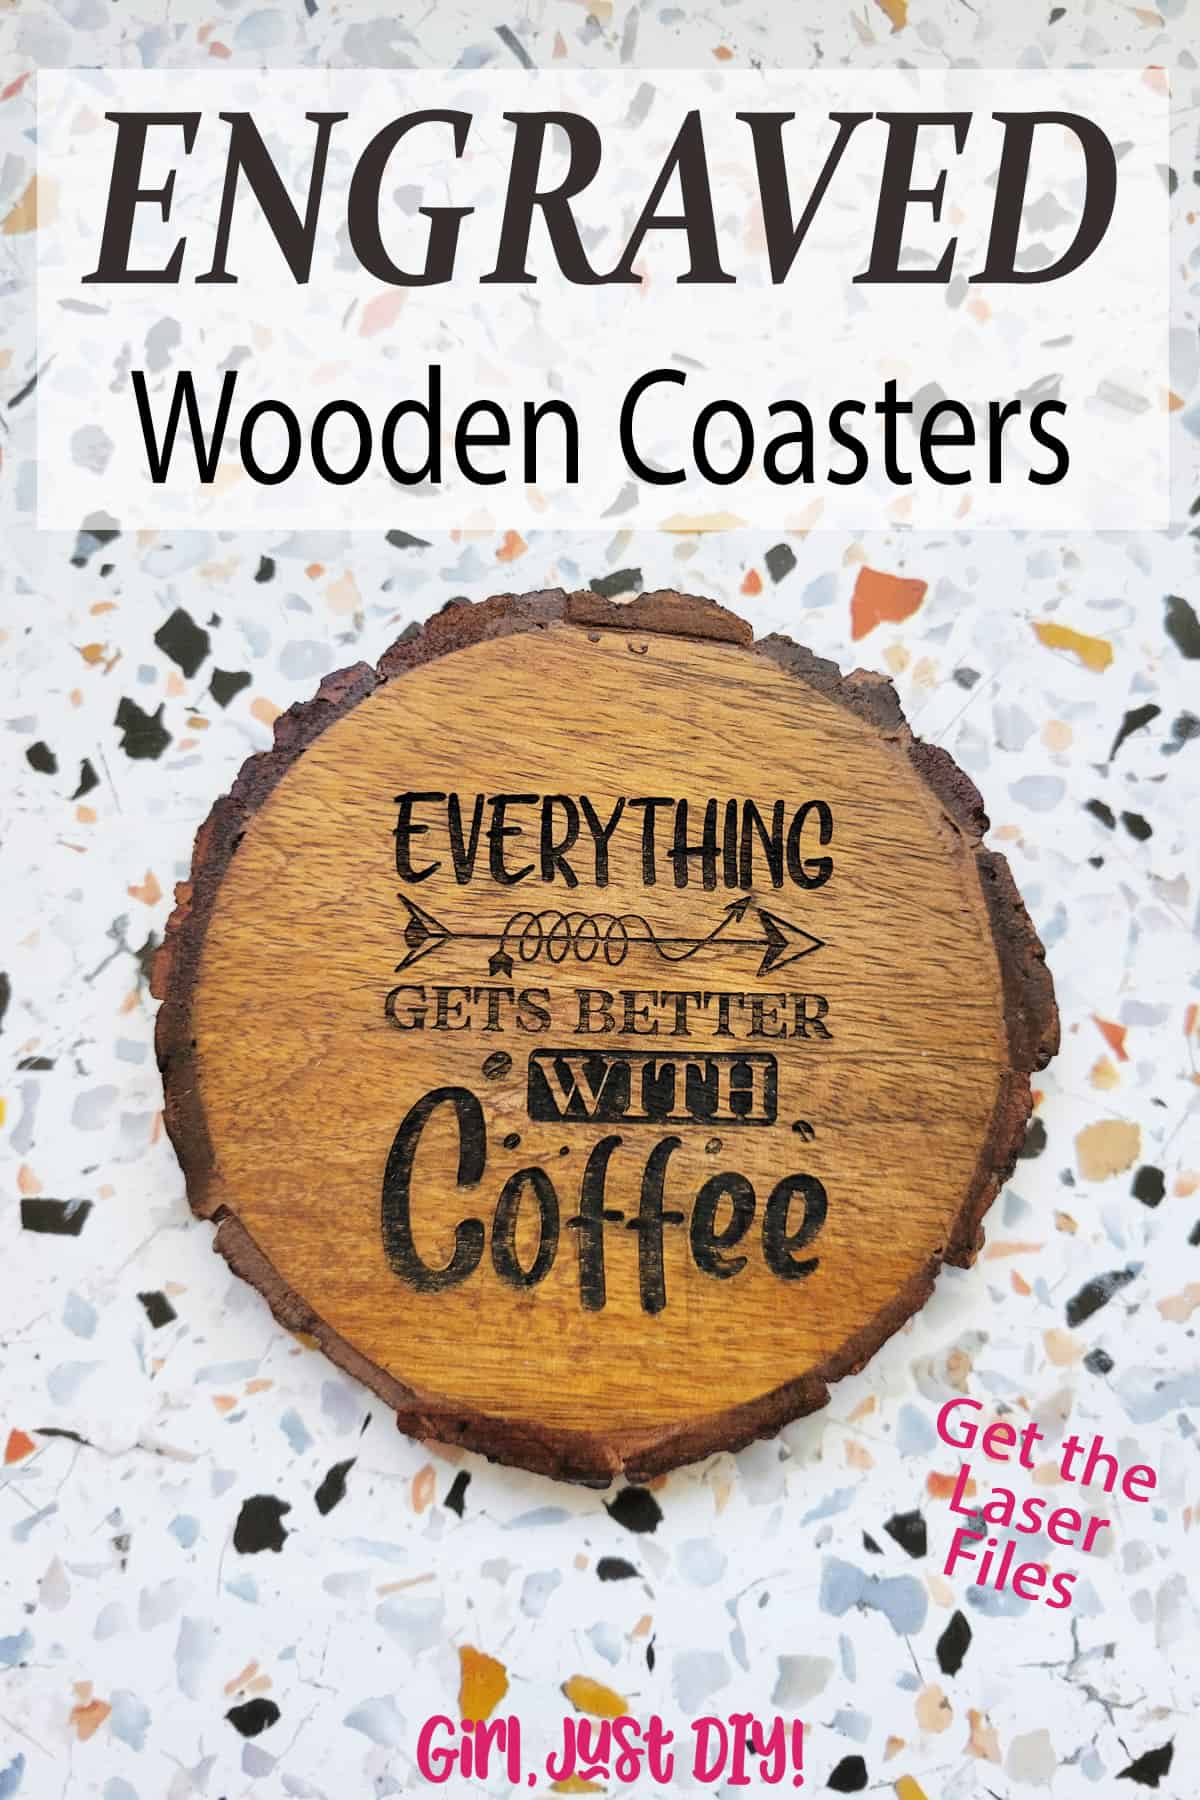 Everythin gets better with Coffee wooden engraved coaster on tabletop